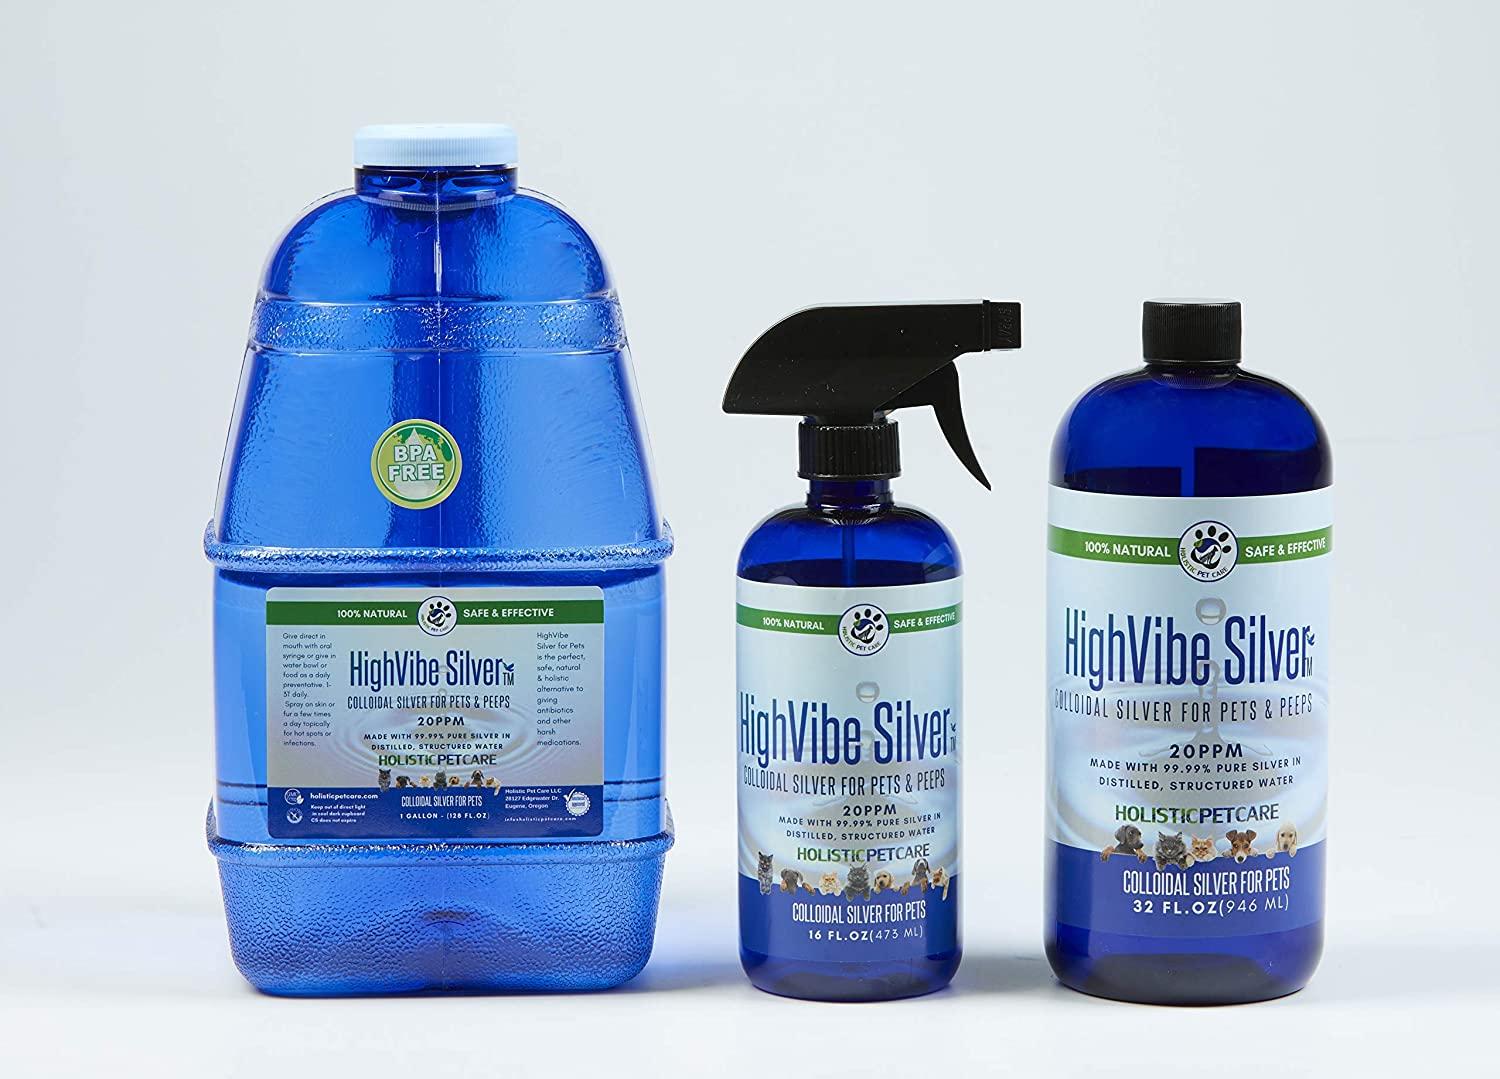 Colloidal Silver 32oz for All Animals and Pets 